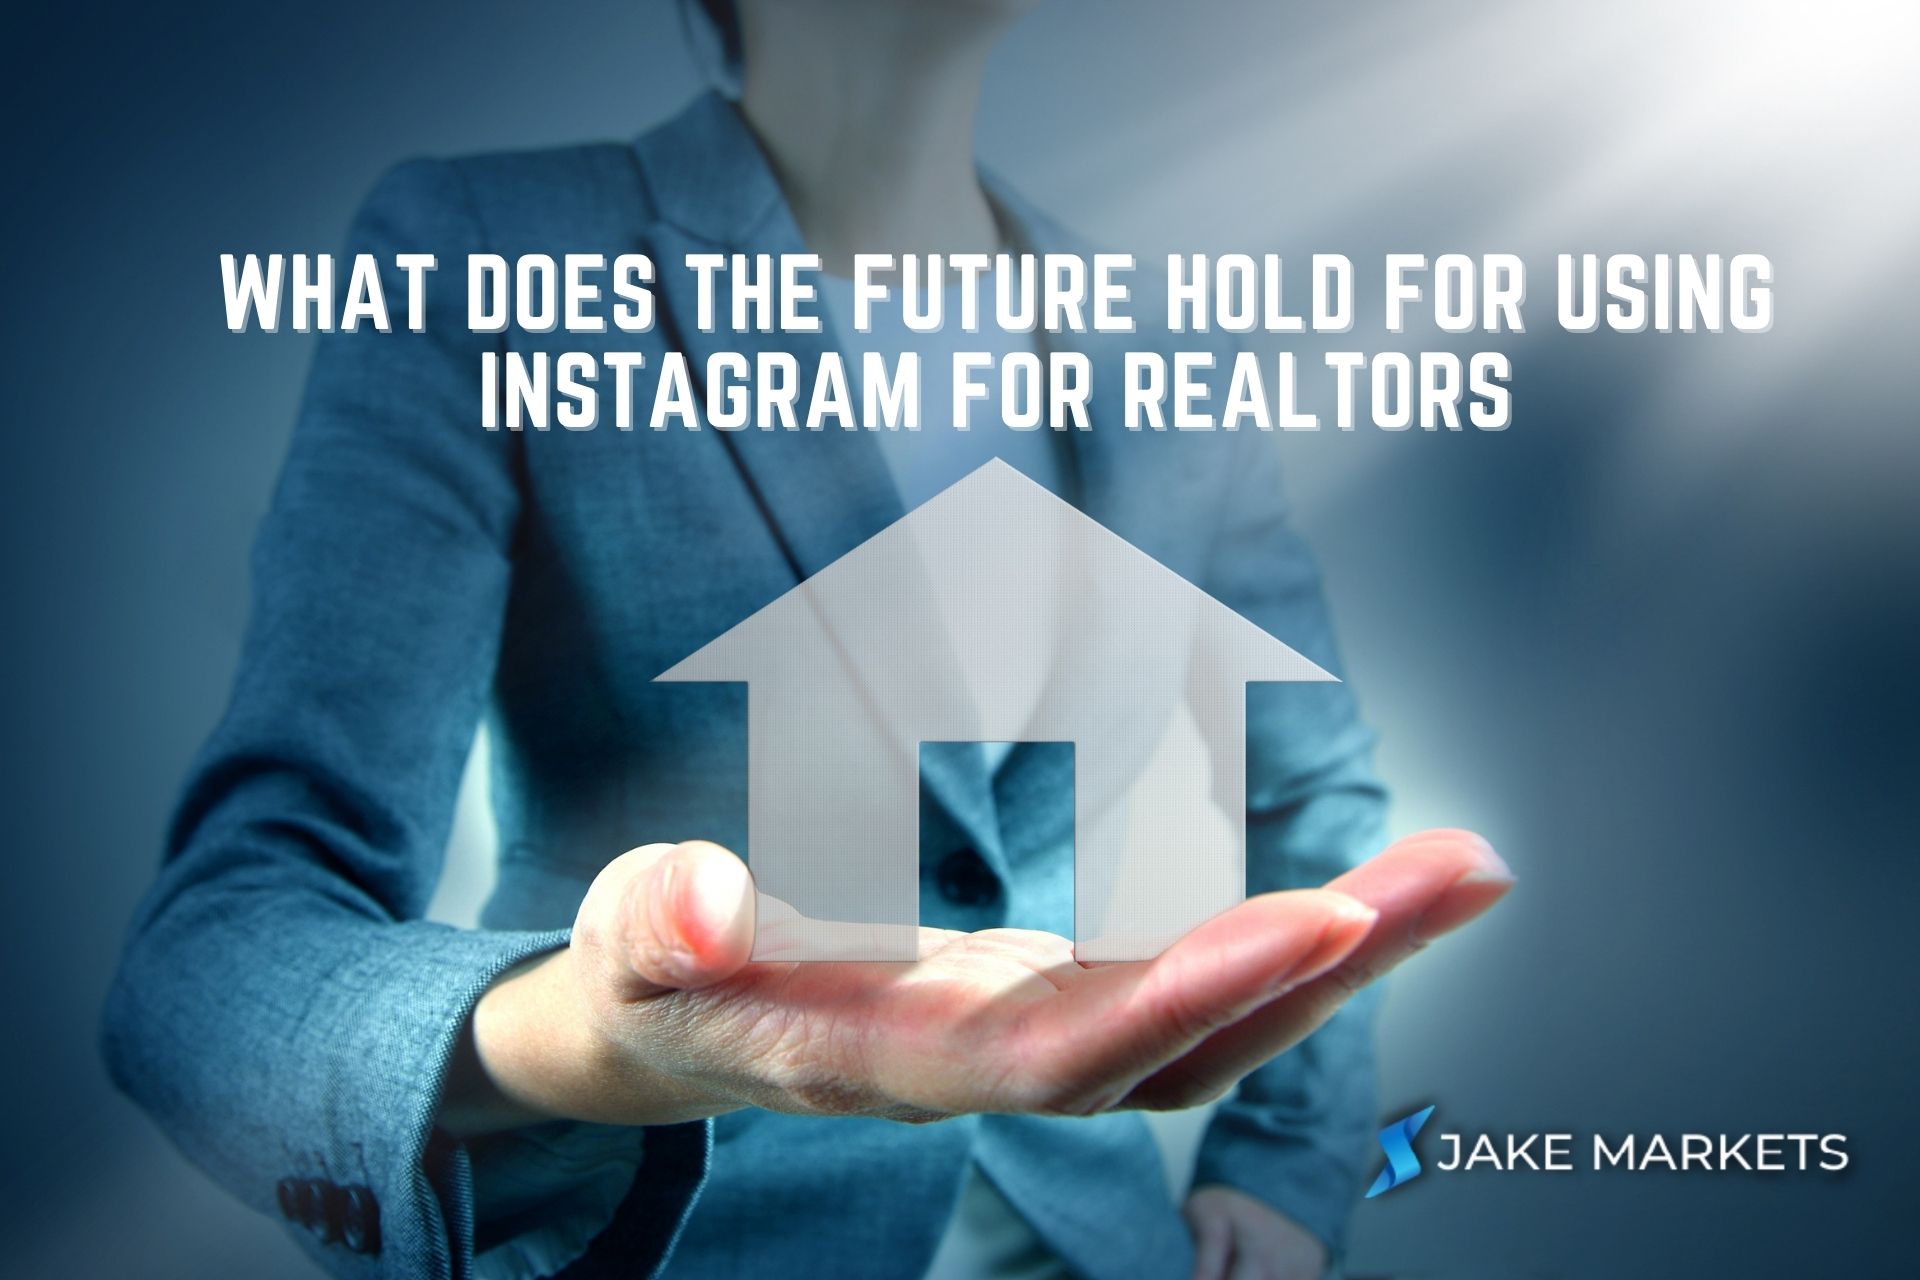 What Does The Future Hold For Using Instagram For Realtors?